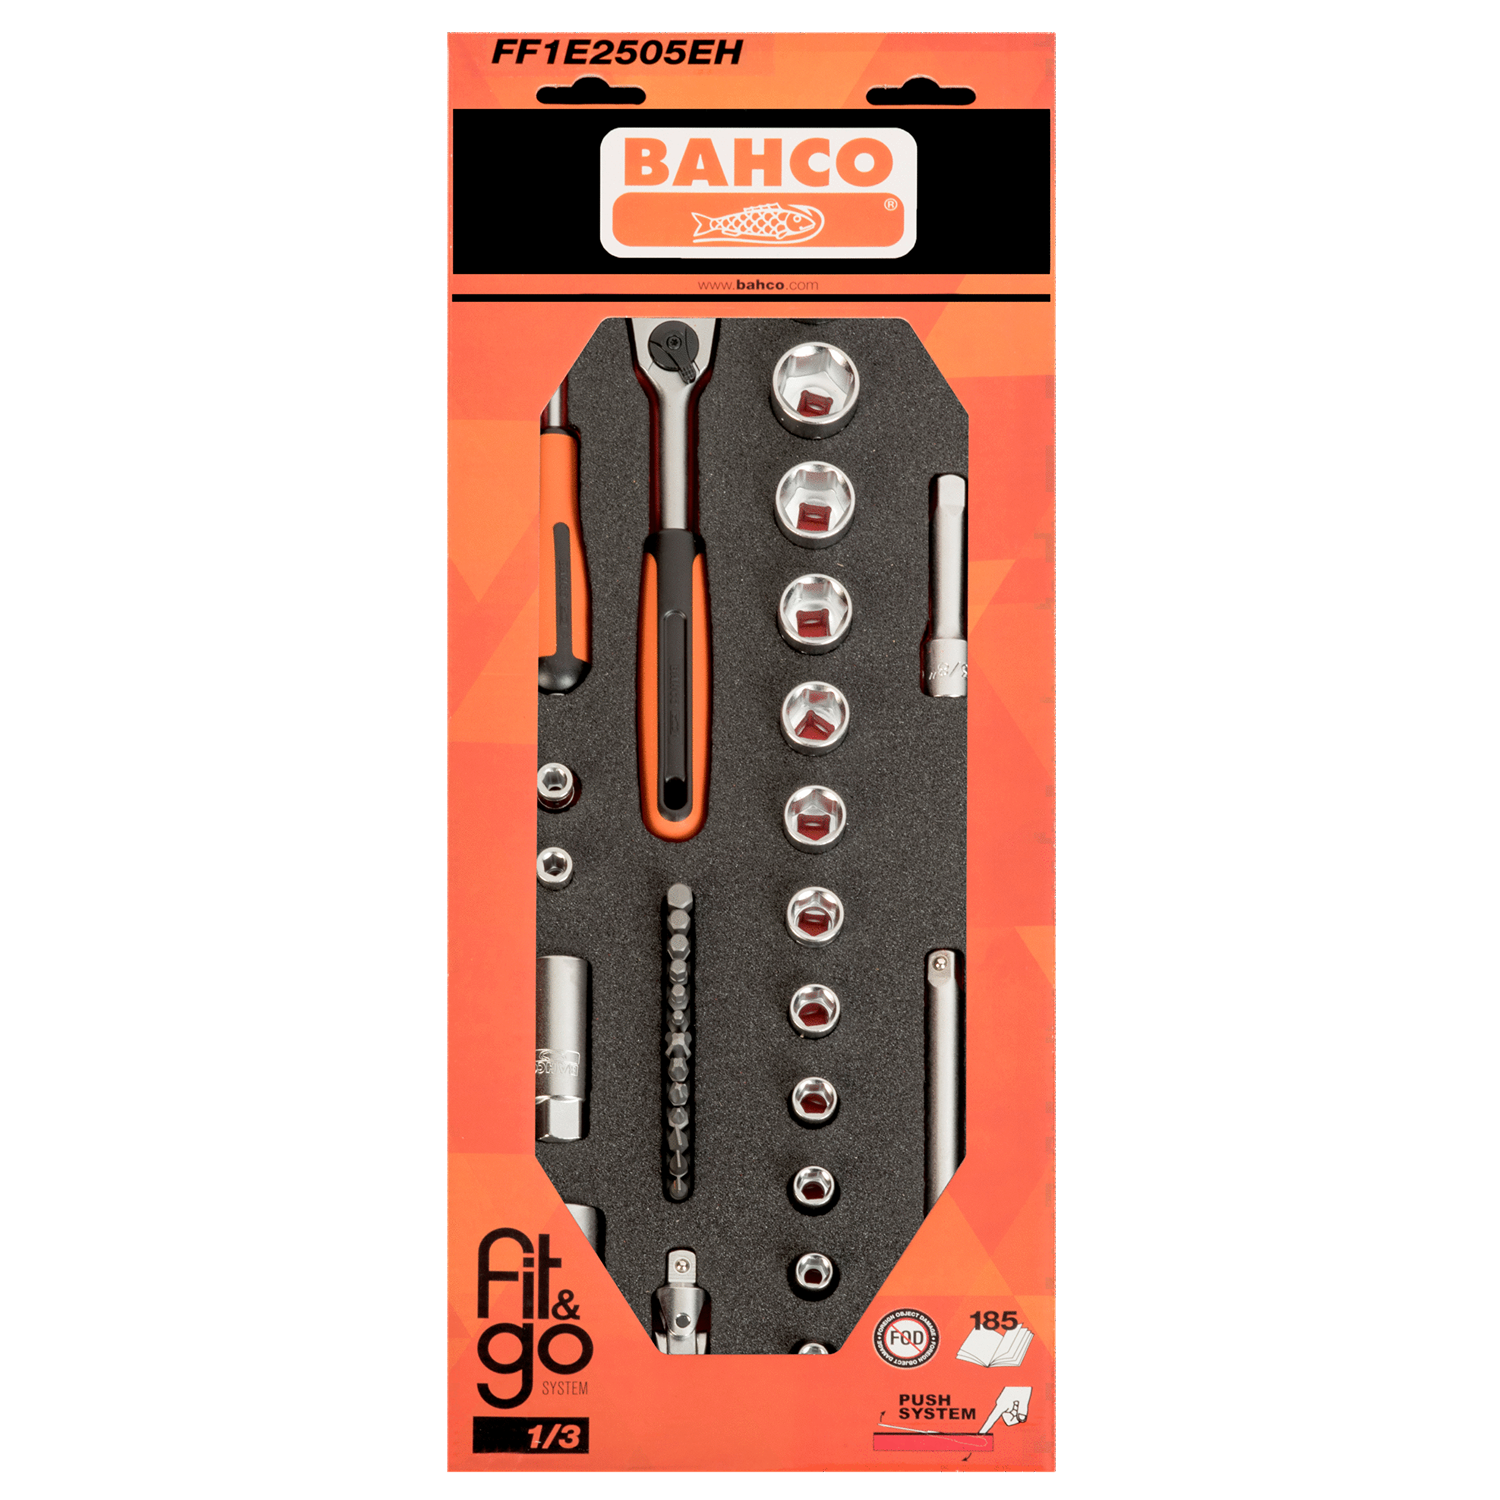 BAHCO FF1E2505EH Fit&Go 1/3 Foam Inlay 1/4” & 3/8” Socket Set - Premium Socket Set from BAHCO - Shop now at Yew Aik.